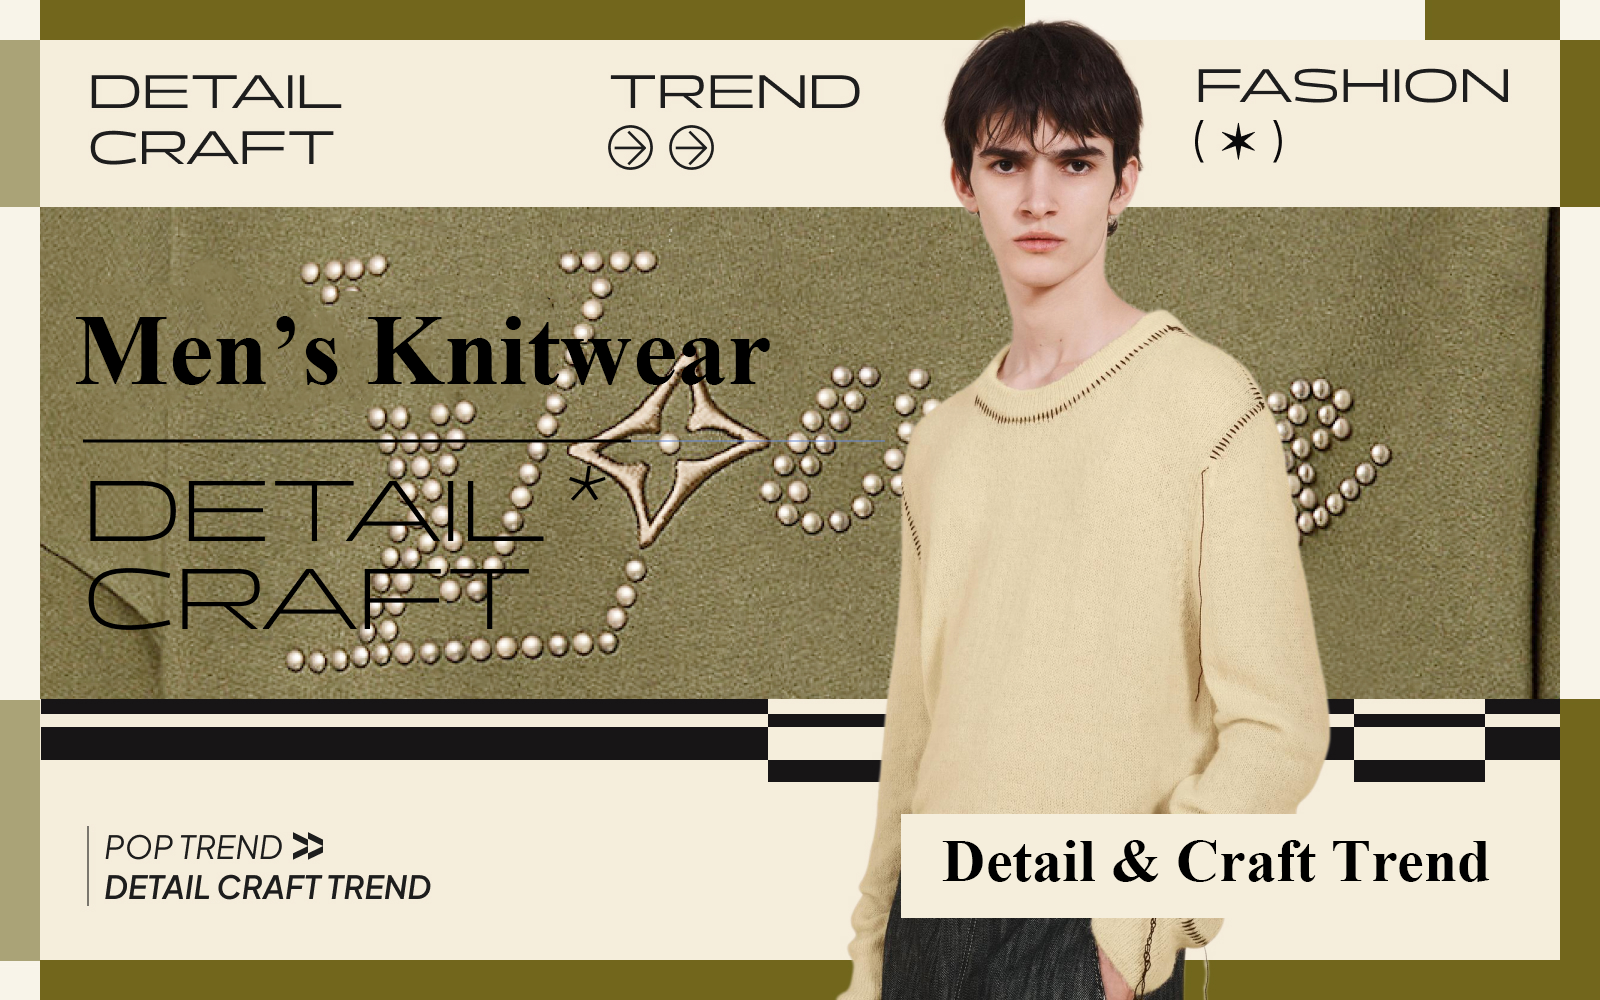 Diverse Fashion -- The Detail & Craft Trend for Men's Knitwear